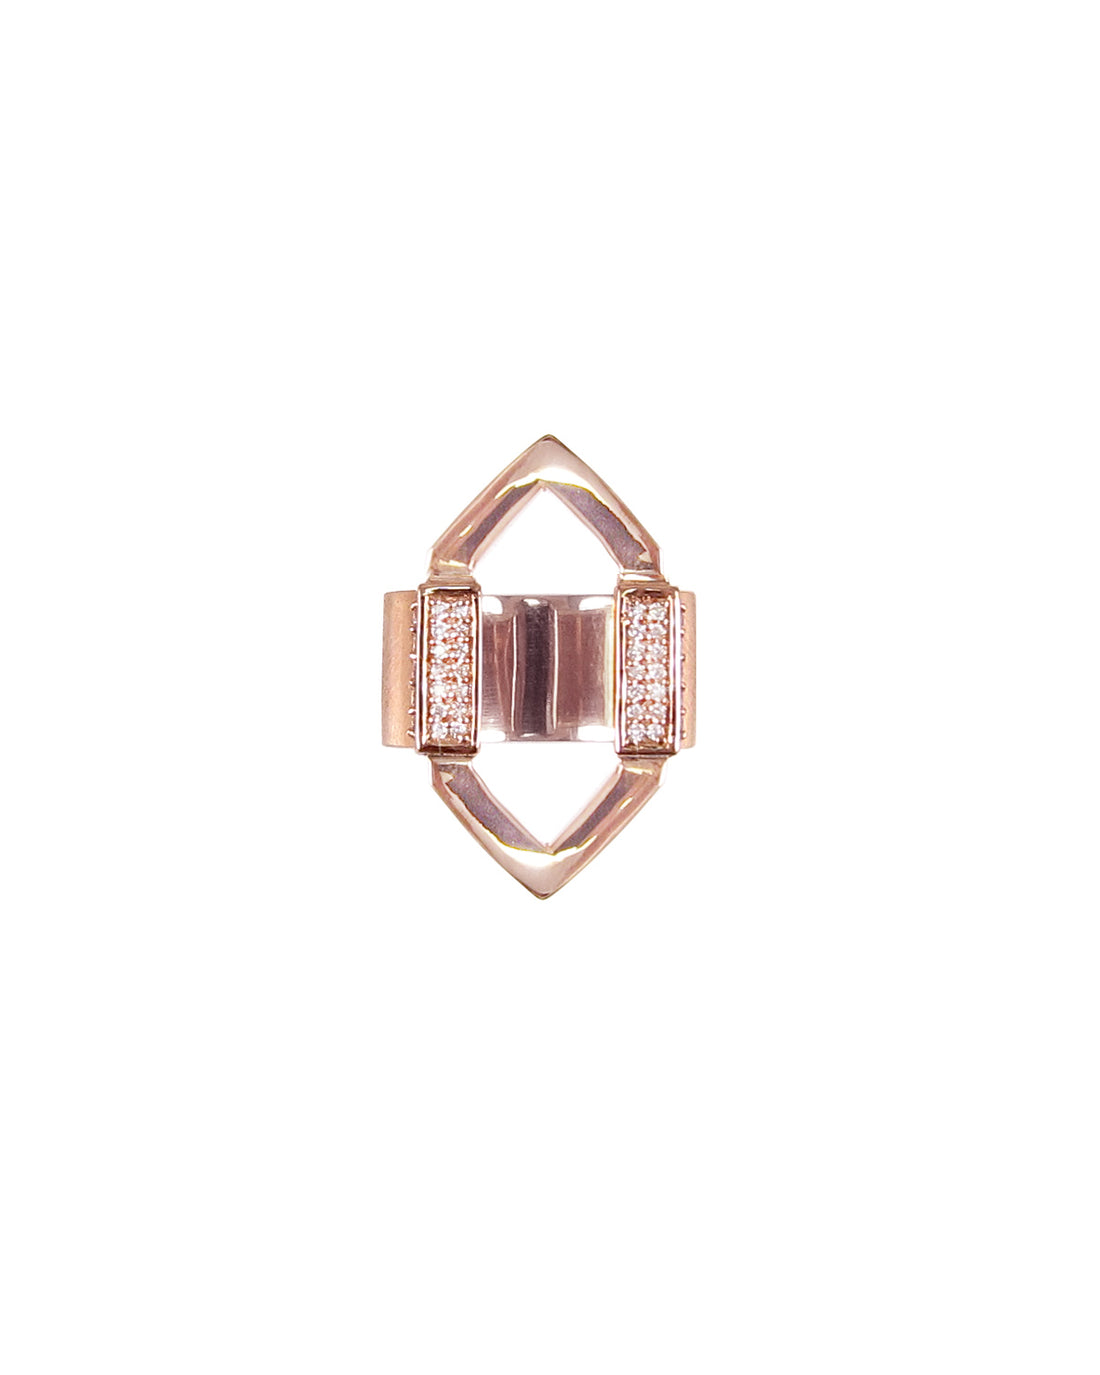 Unusual 14k Diamond Open Marquis ring with cigar band in rose gold